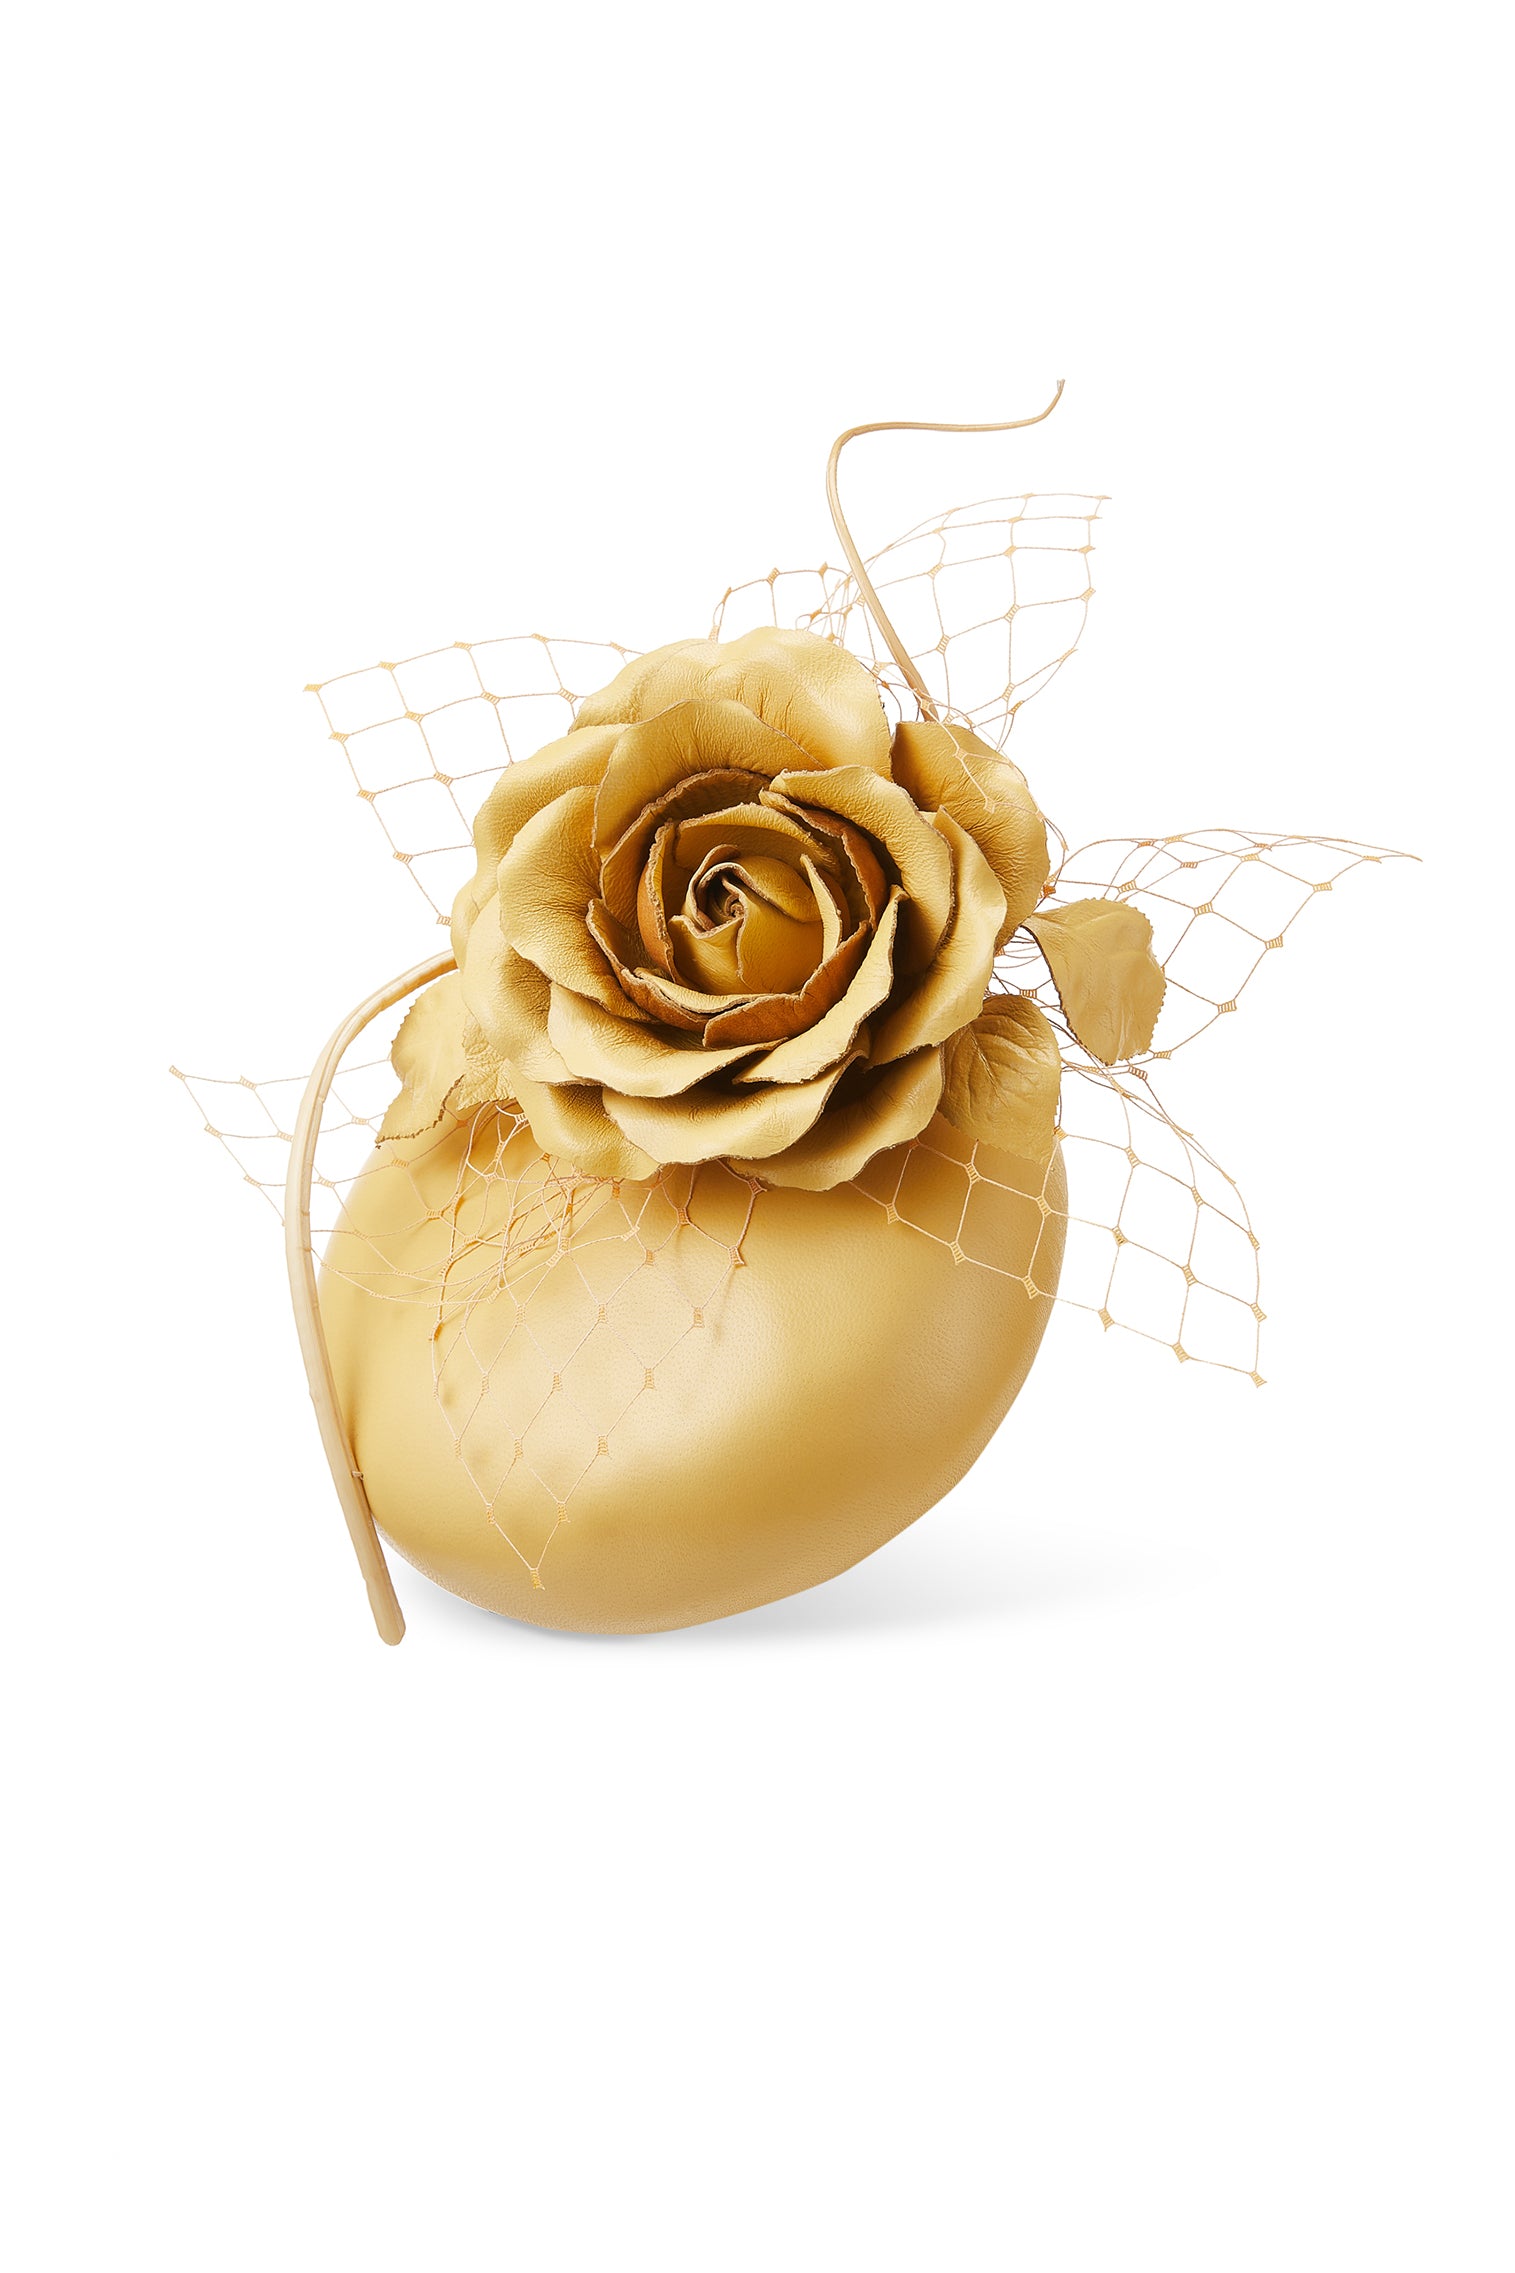 Rose Bud Yellow Leather Percher Hat - Lock Couture by Awon Golding - Lock & Co. Hatters London UK